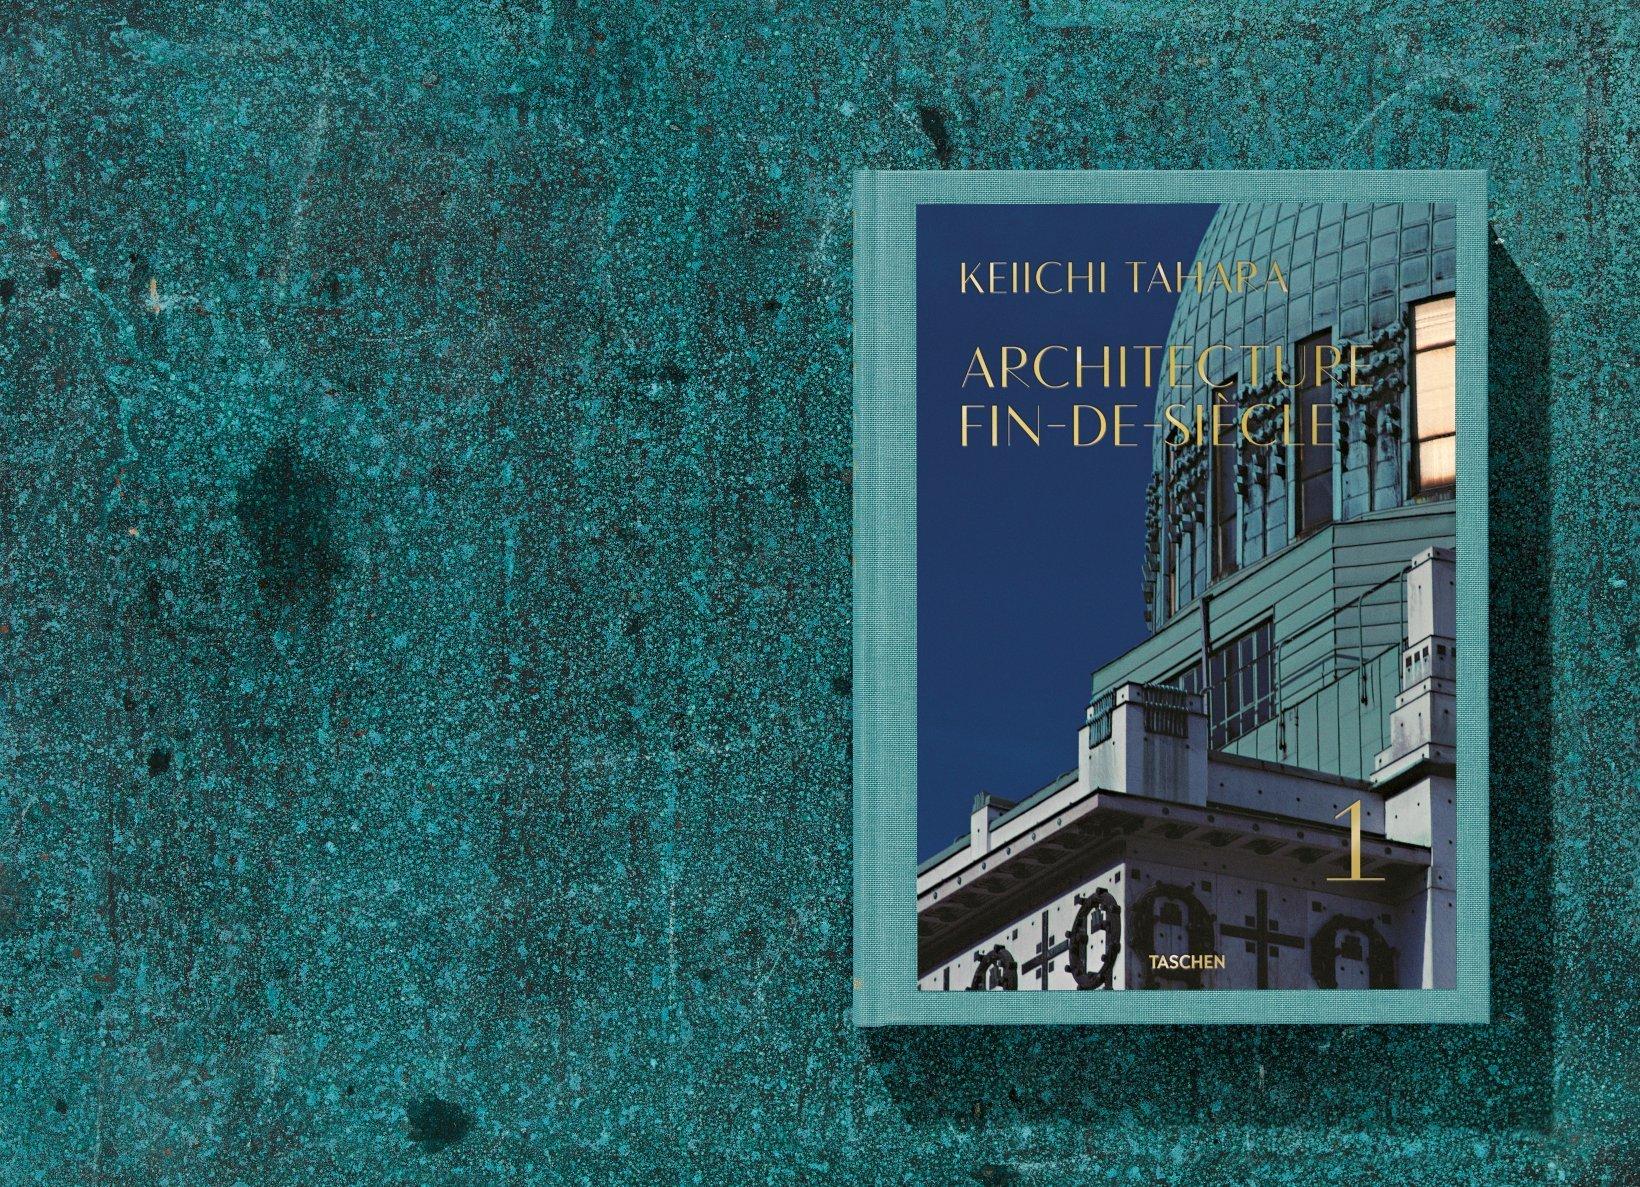 Keiichi Tahara, Architecture Fin-de-Siècle, Limited Edition, Set of 3 Books In New Condition For Sale In Los Angeles, CA